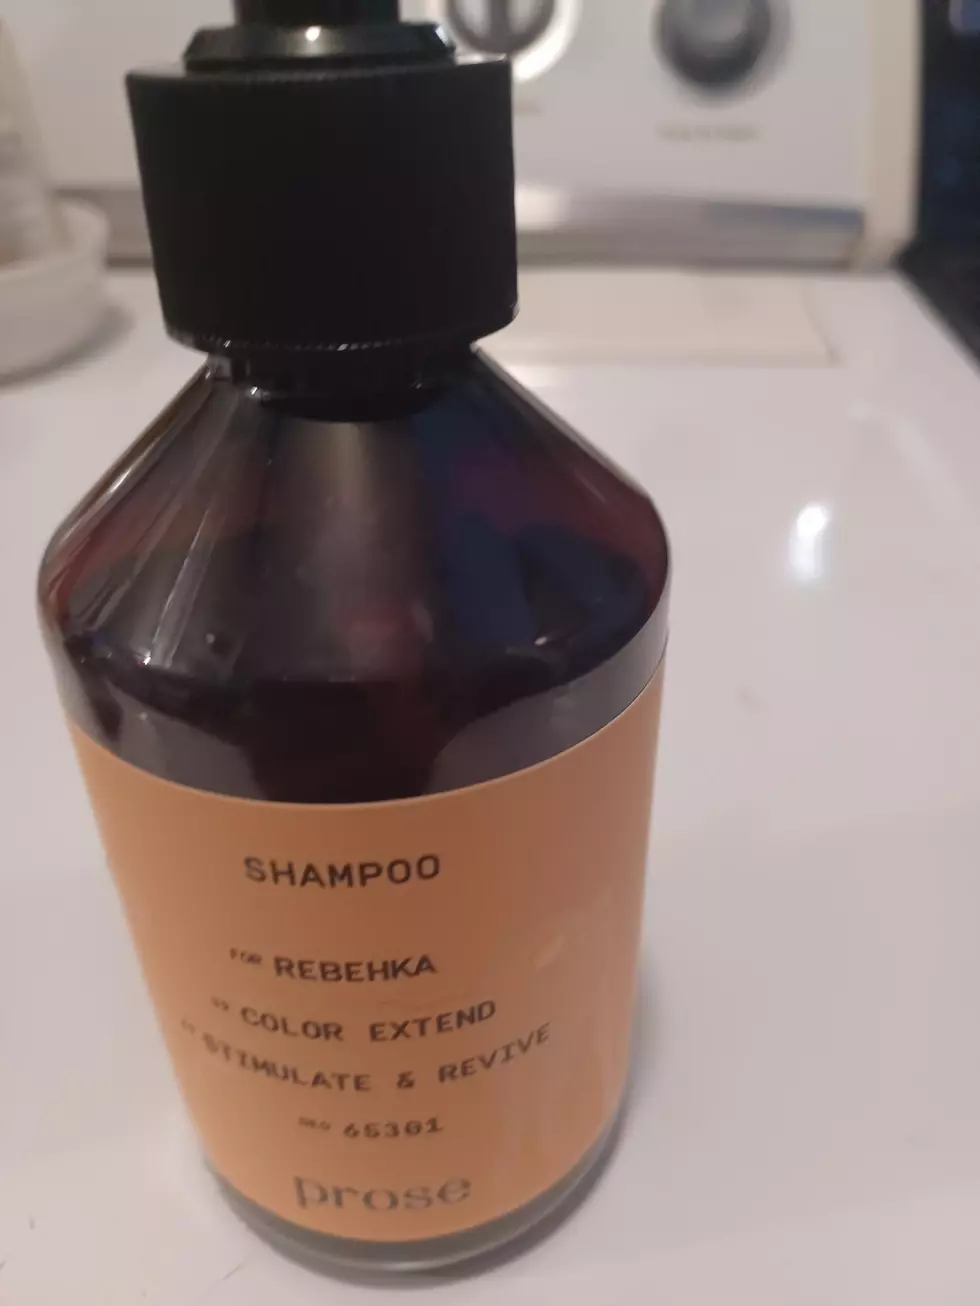 I Tried An Expensive And Elaborate Hair Product So You Don’t Have To